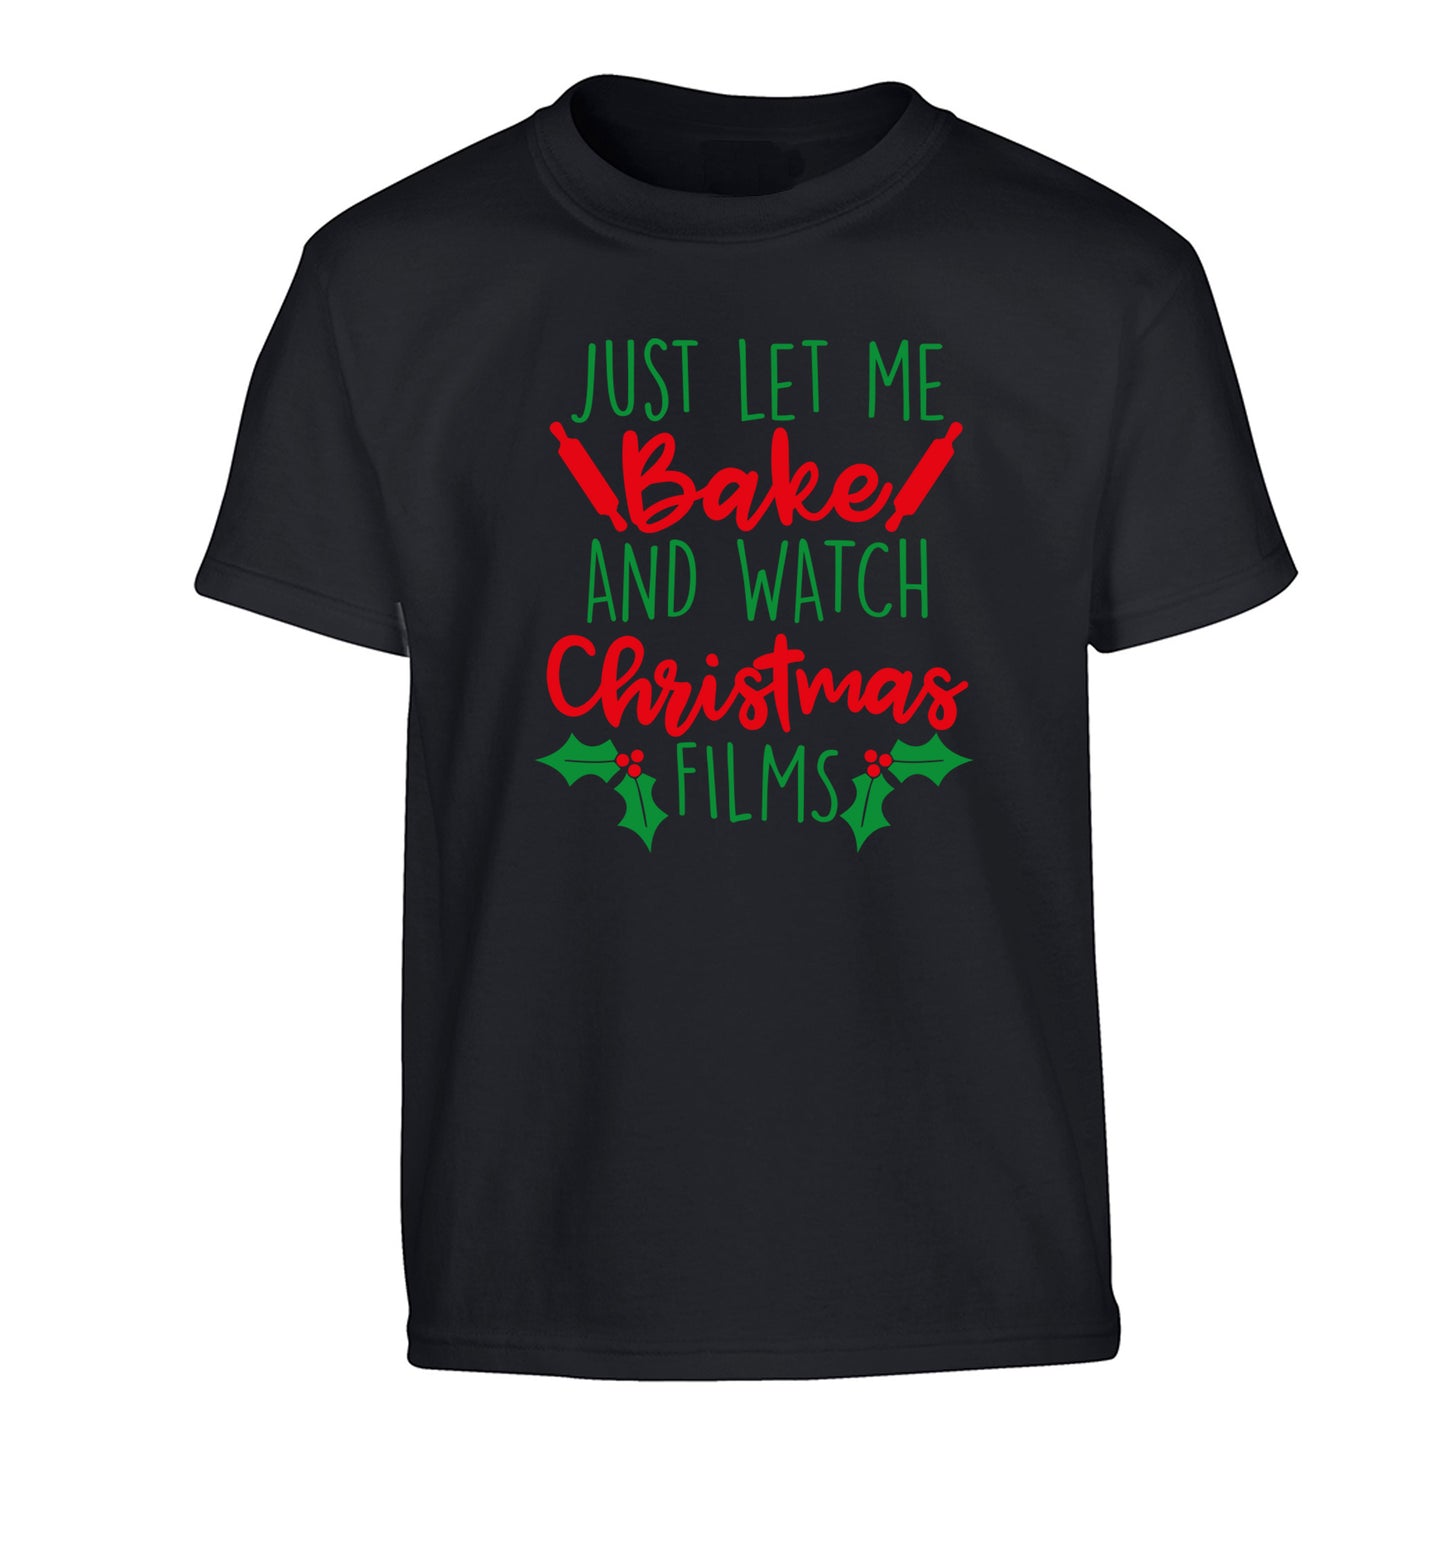 Just let me bake and watch Christmas films Children's black Tshirt 12-14 Years